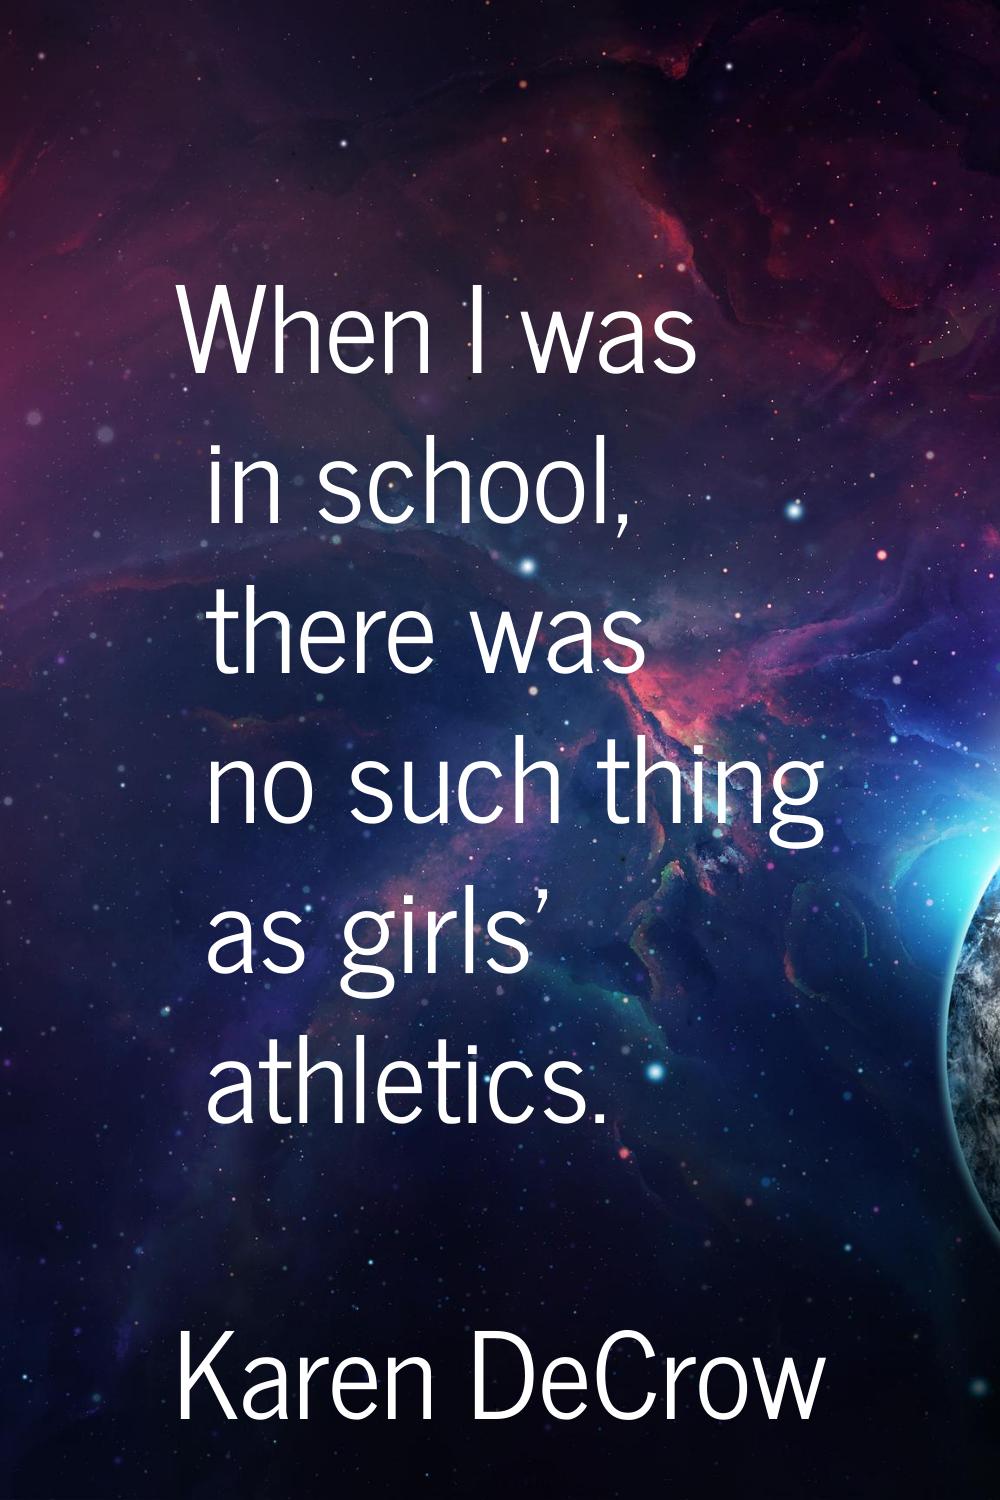 When I was in school, there was no such thing as girls' athletics.